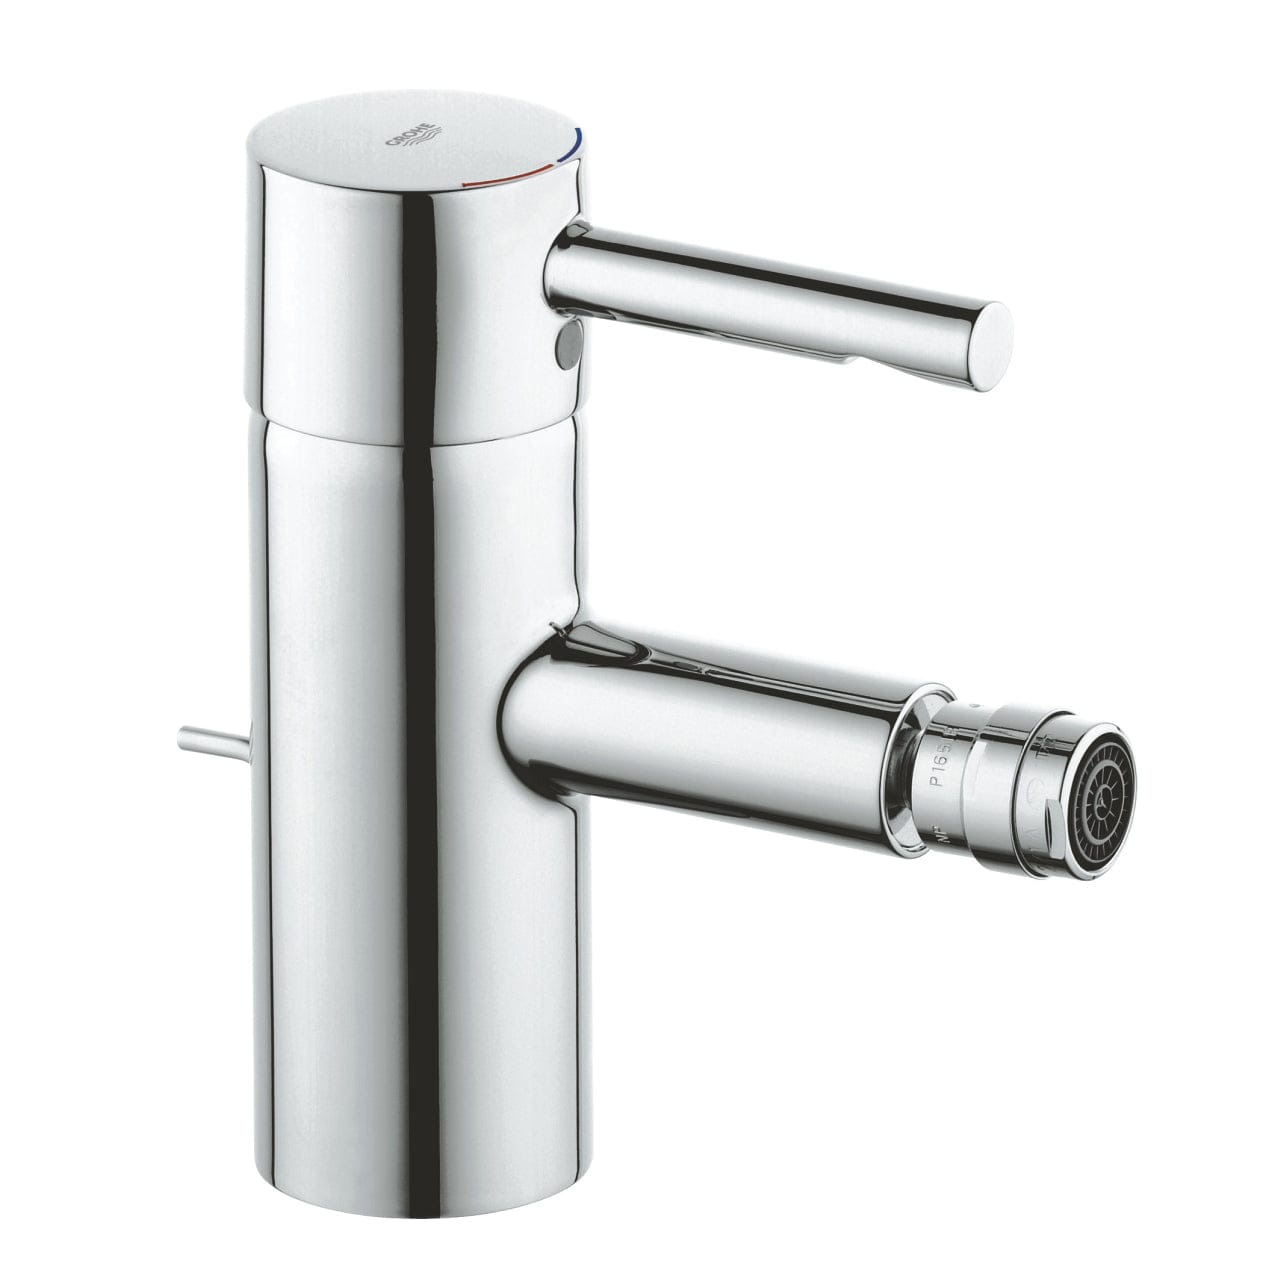 Grohe Essence Single-lever Bidet Mixer 1/2″ S-Size, Chrome | Supply Master | Accra, Ghana Bathroom Faucet Buy Tools hardware Building materials